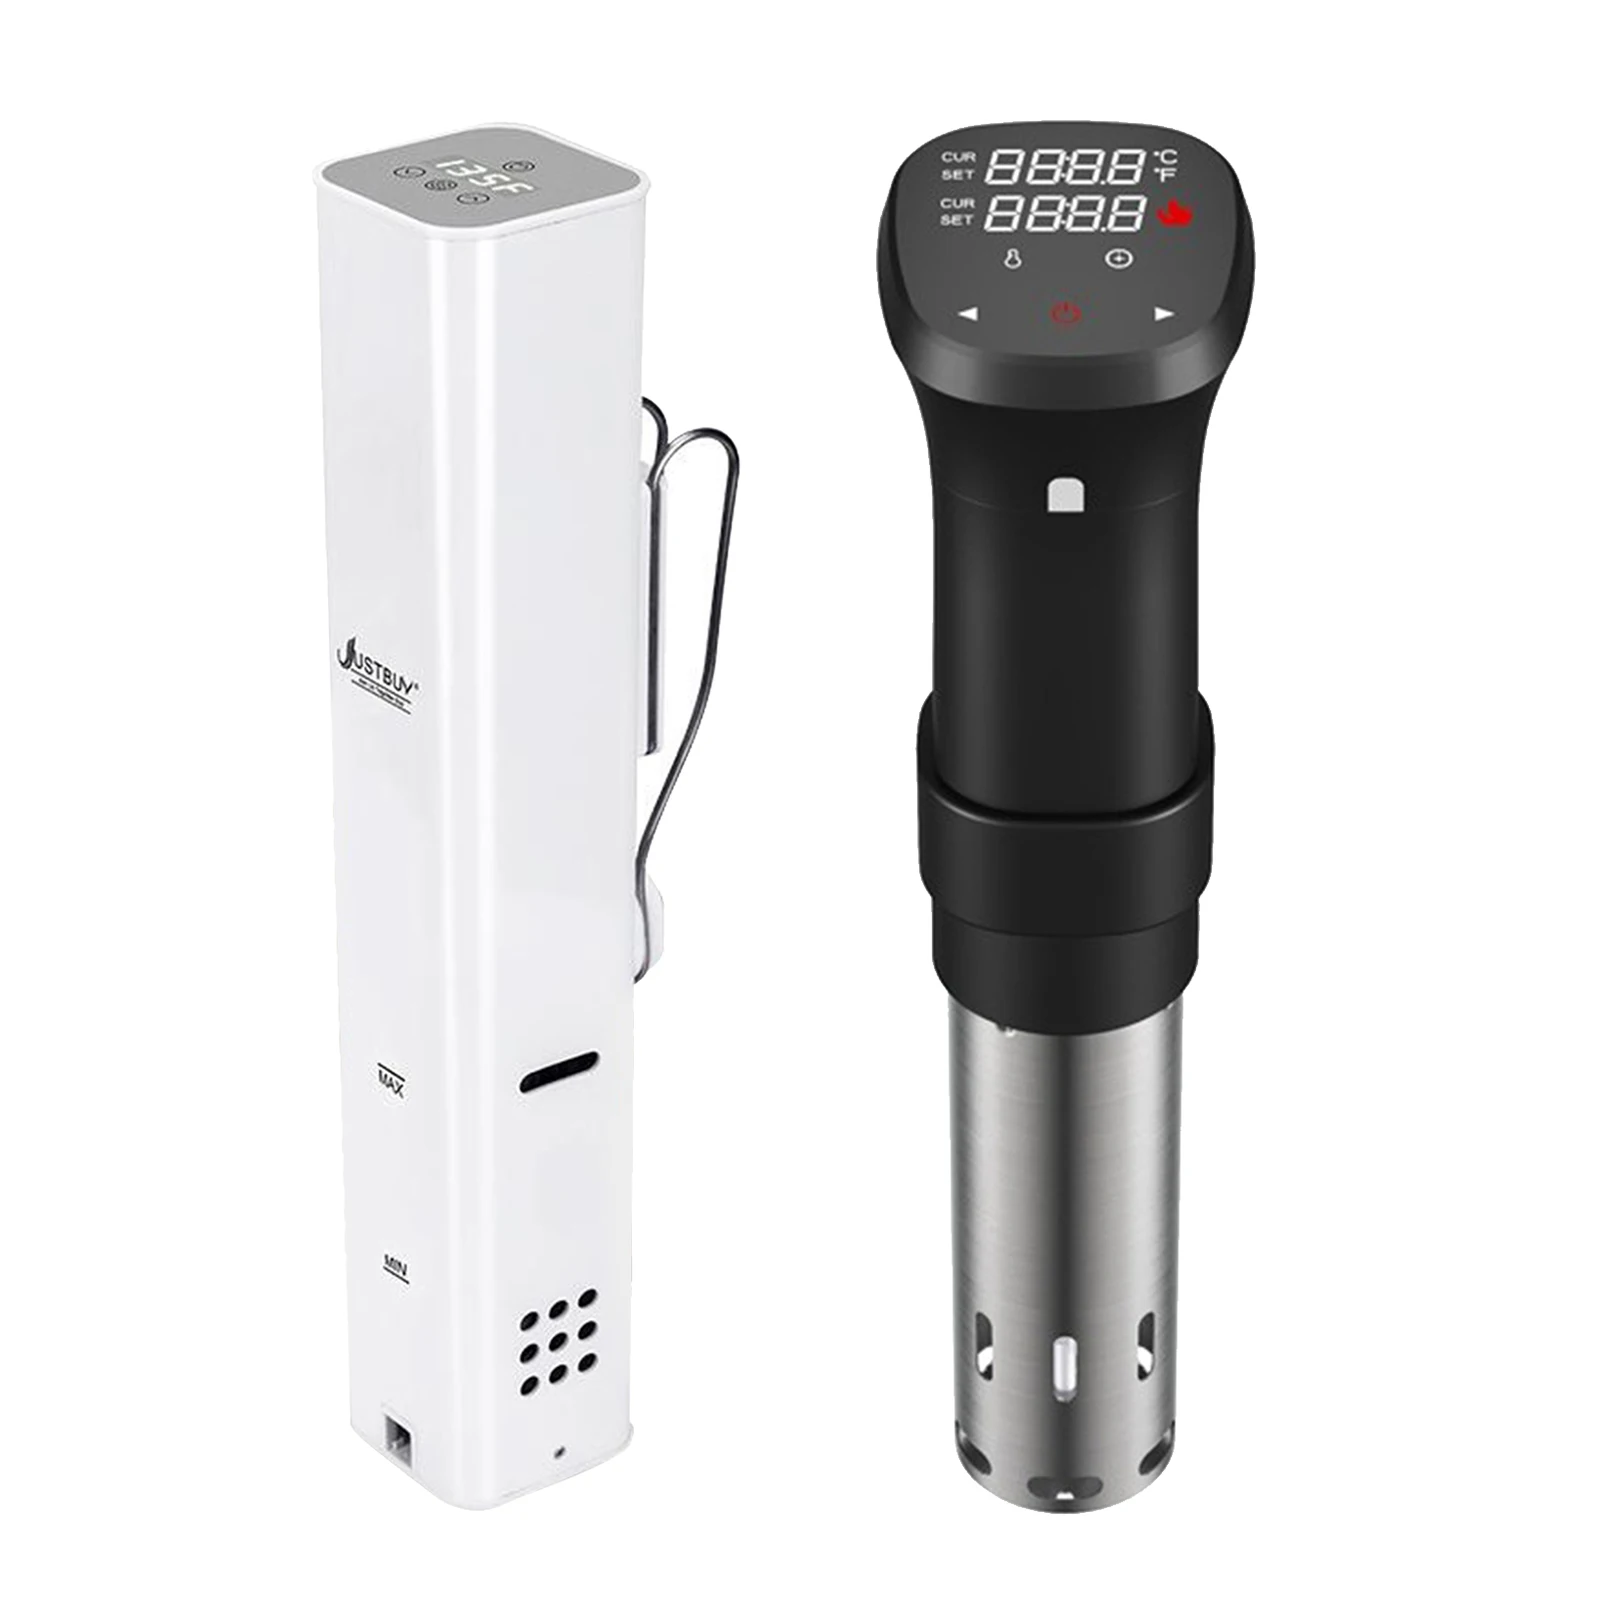  IPX7 Waterproof Sous Vide Precision Cooker Machine Slow Cooker with LCD Digital Accurate Control